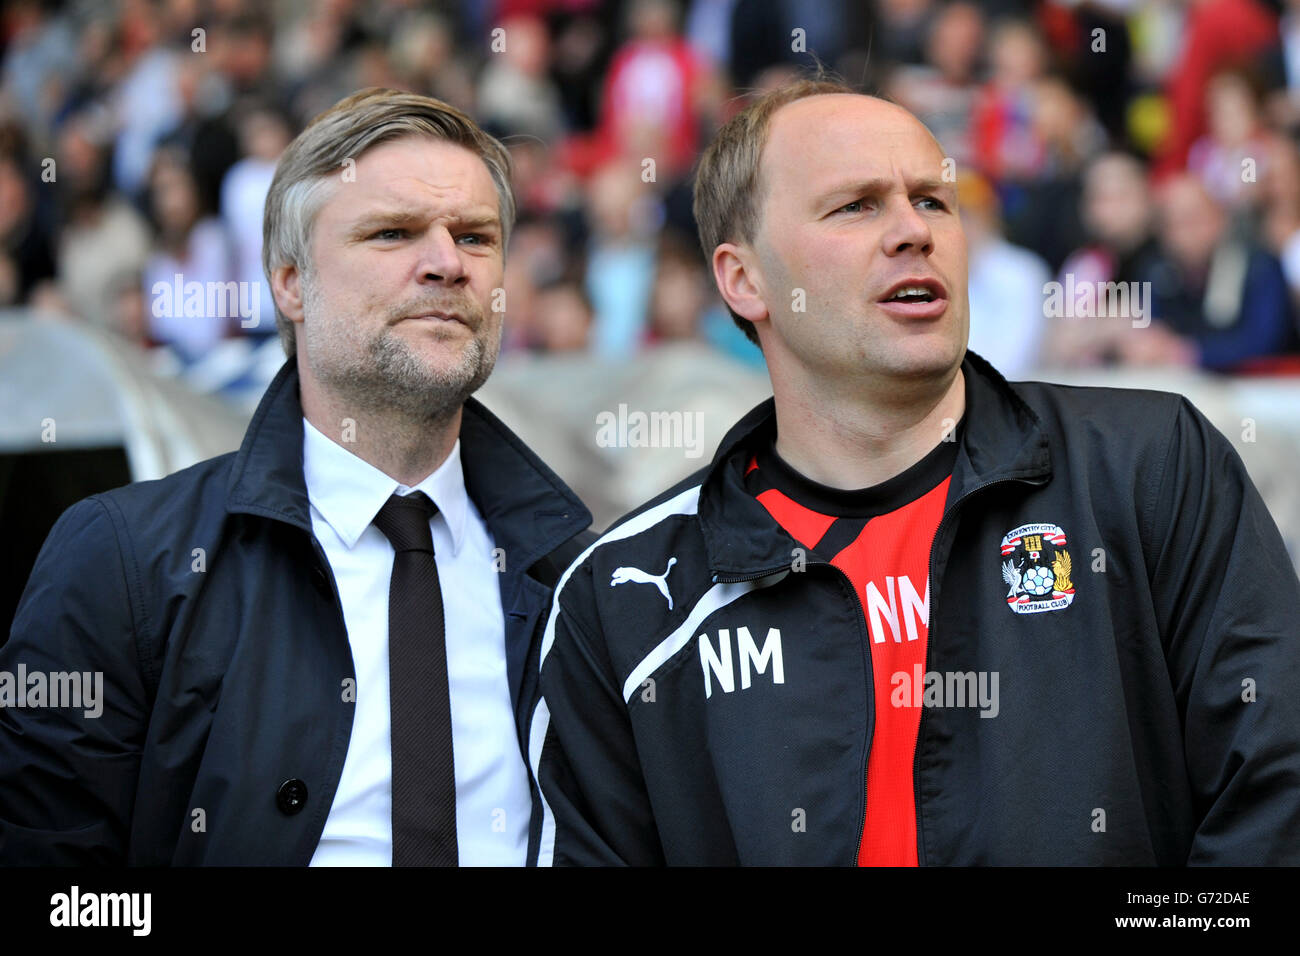 Soccer - Sky Bet League One - Sheffield United v Coventry City - Bramall Lane. Coventry City's manager Steven Pressley and assistant manager Neil McFarland (right) during the game Stock Photo